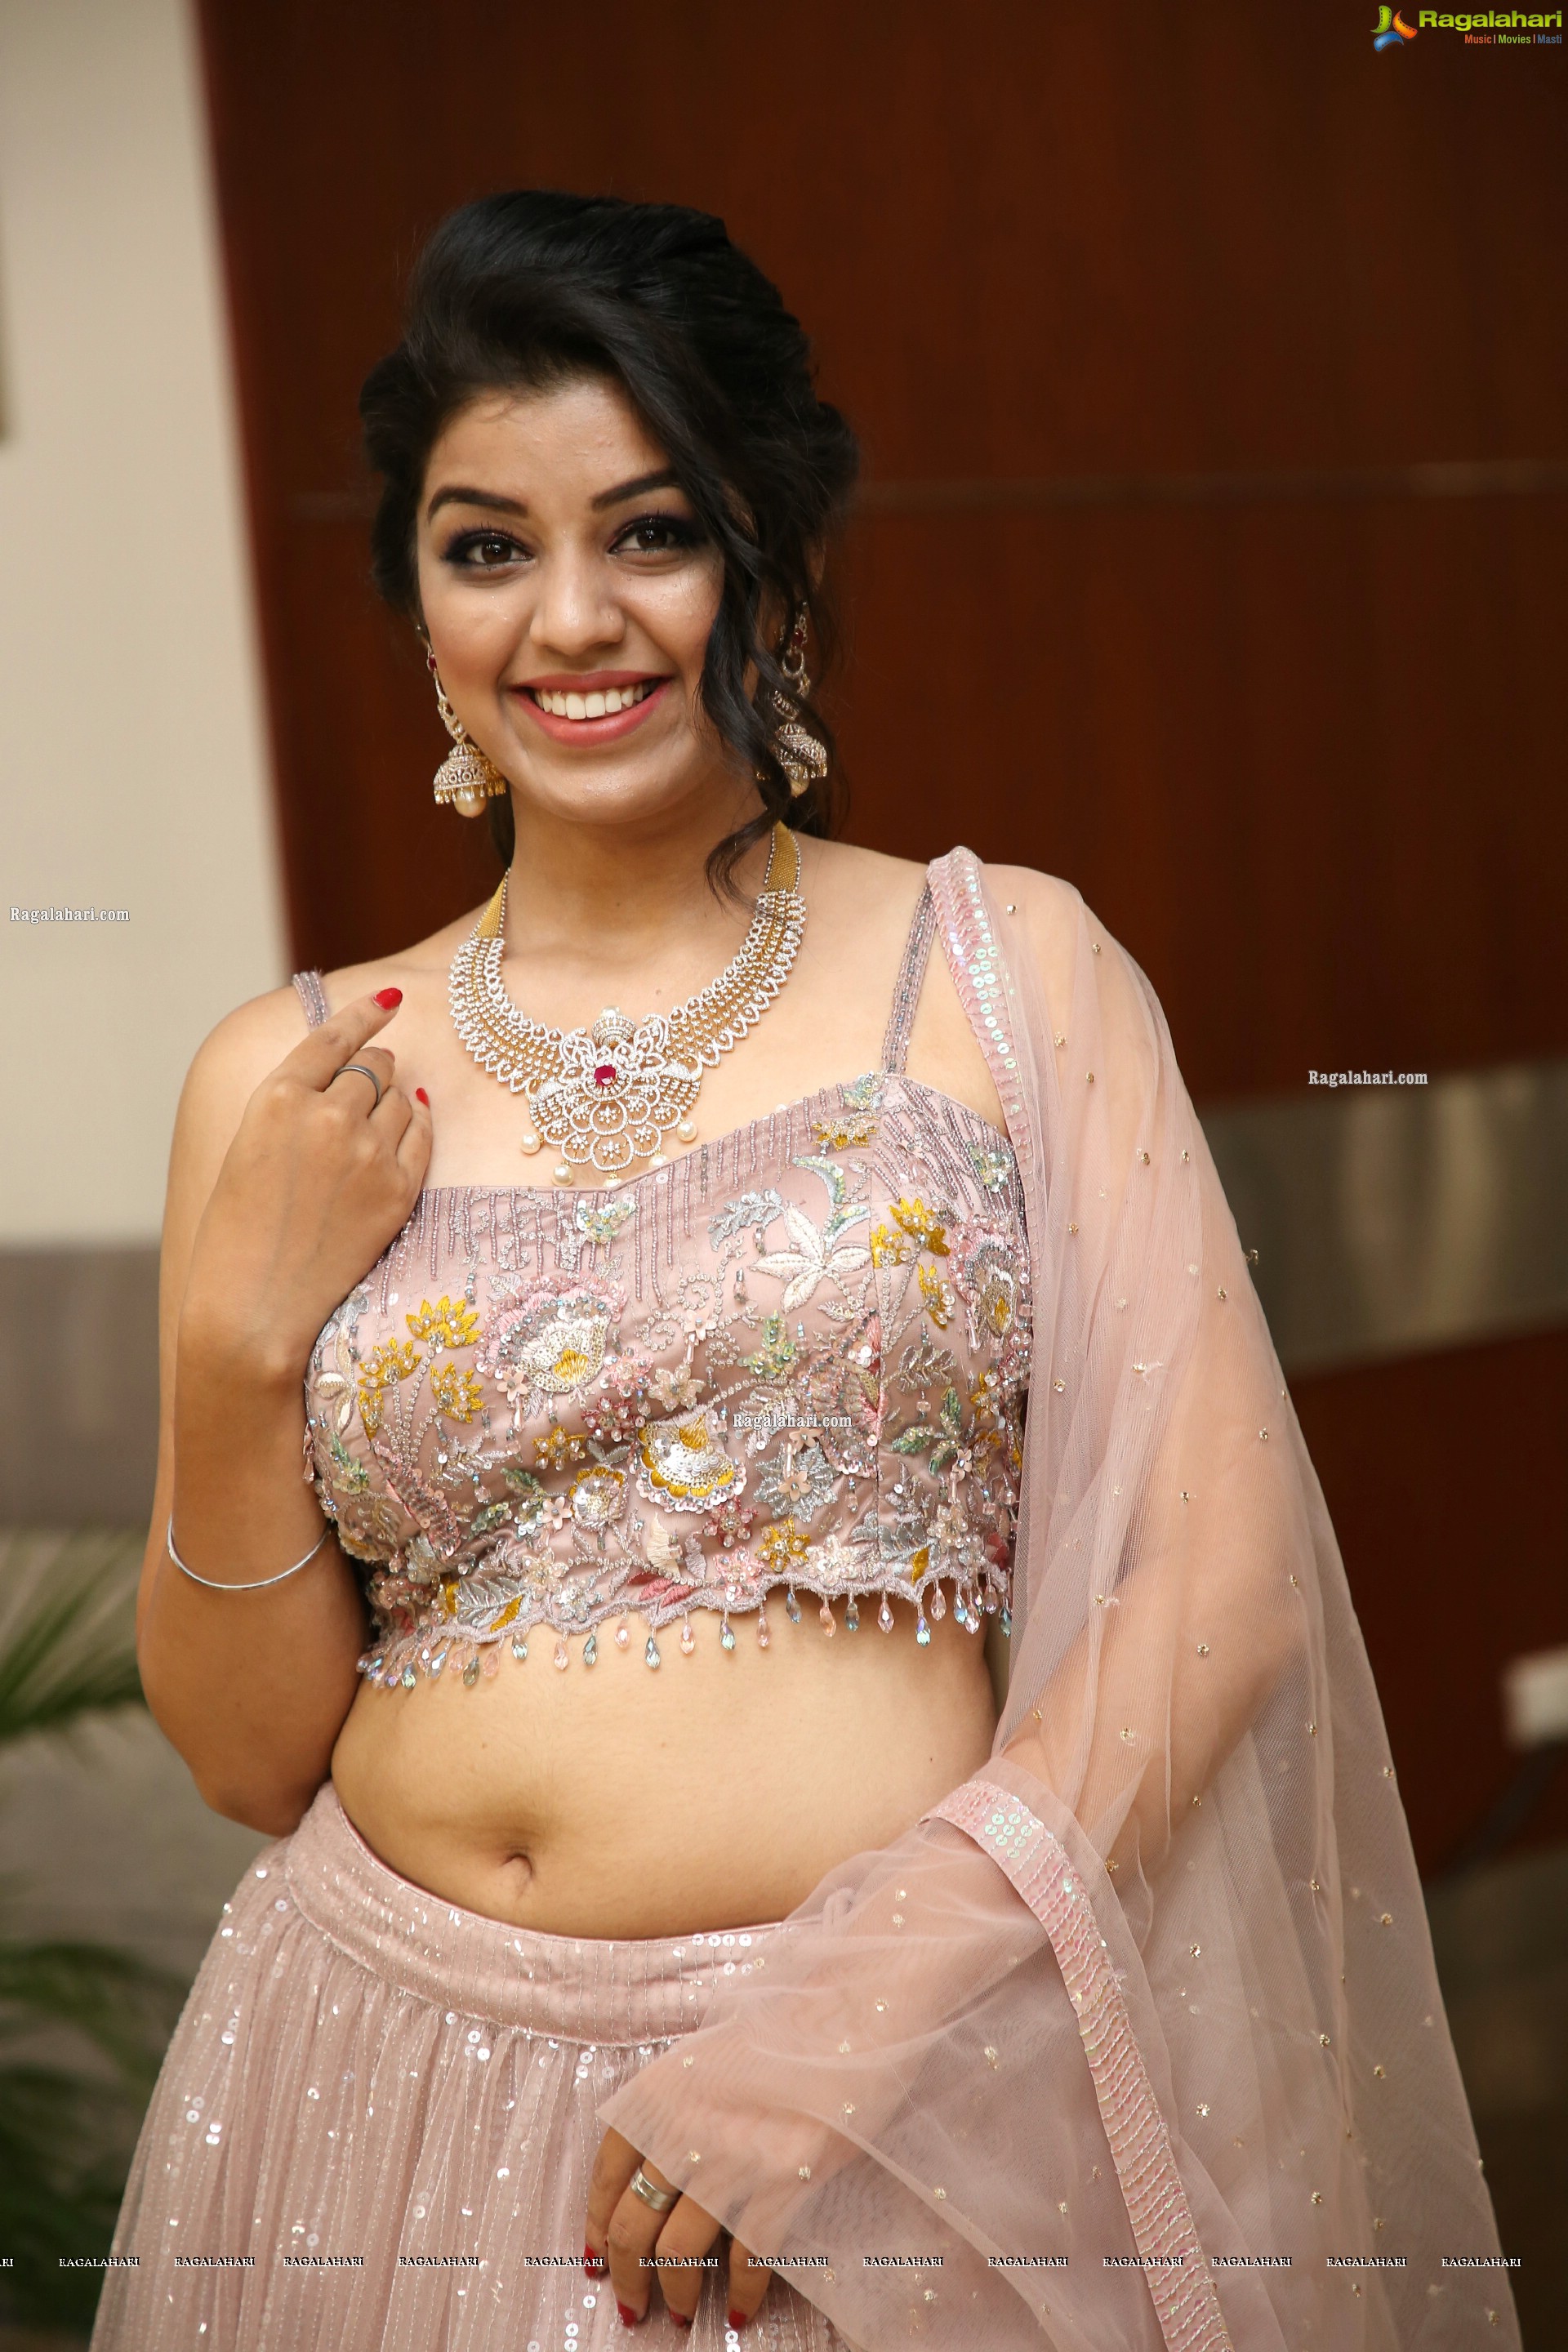 Shruthi Sharma in Traditional Jewellery, HD Photo Gallery